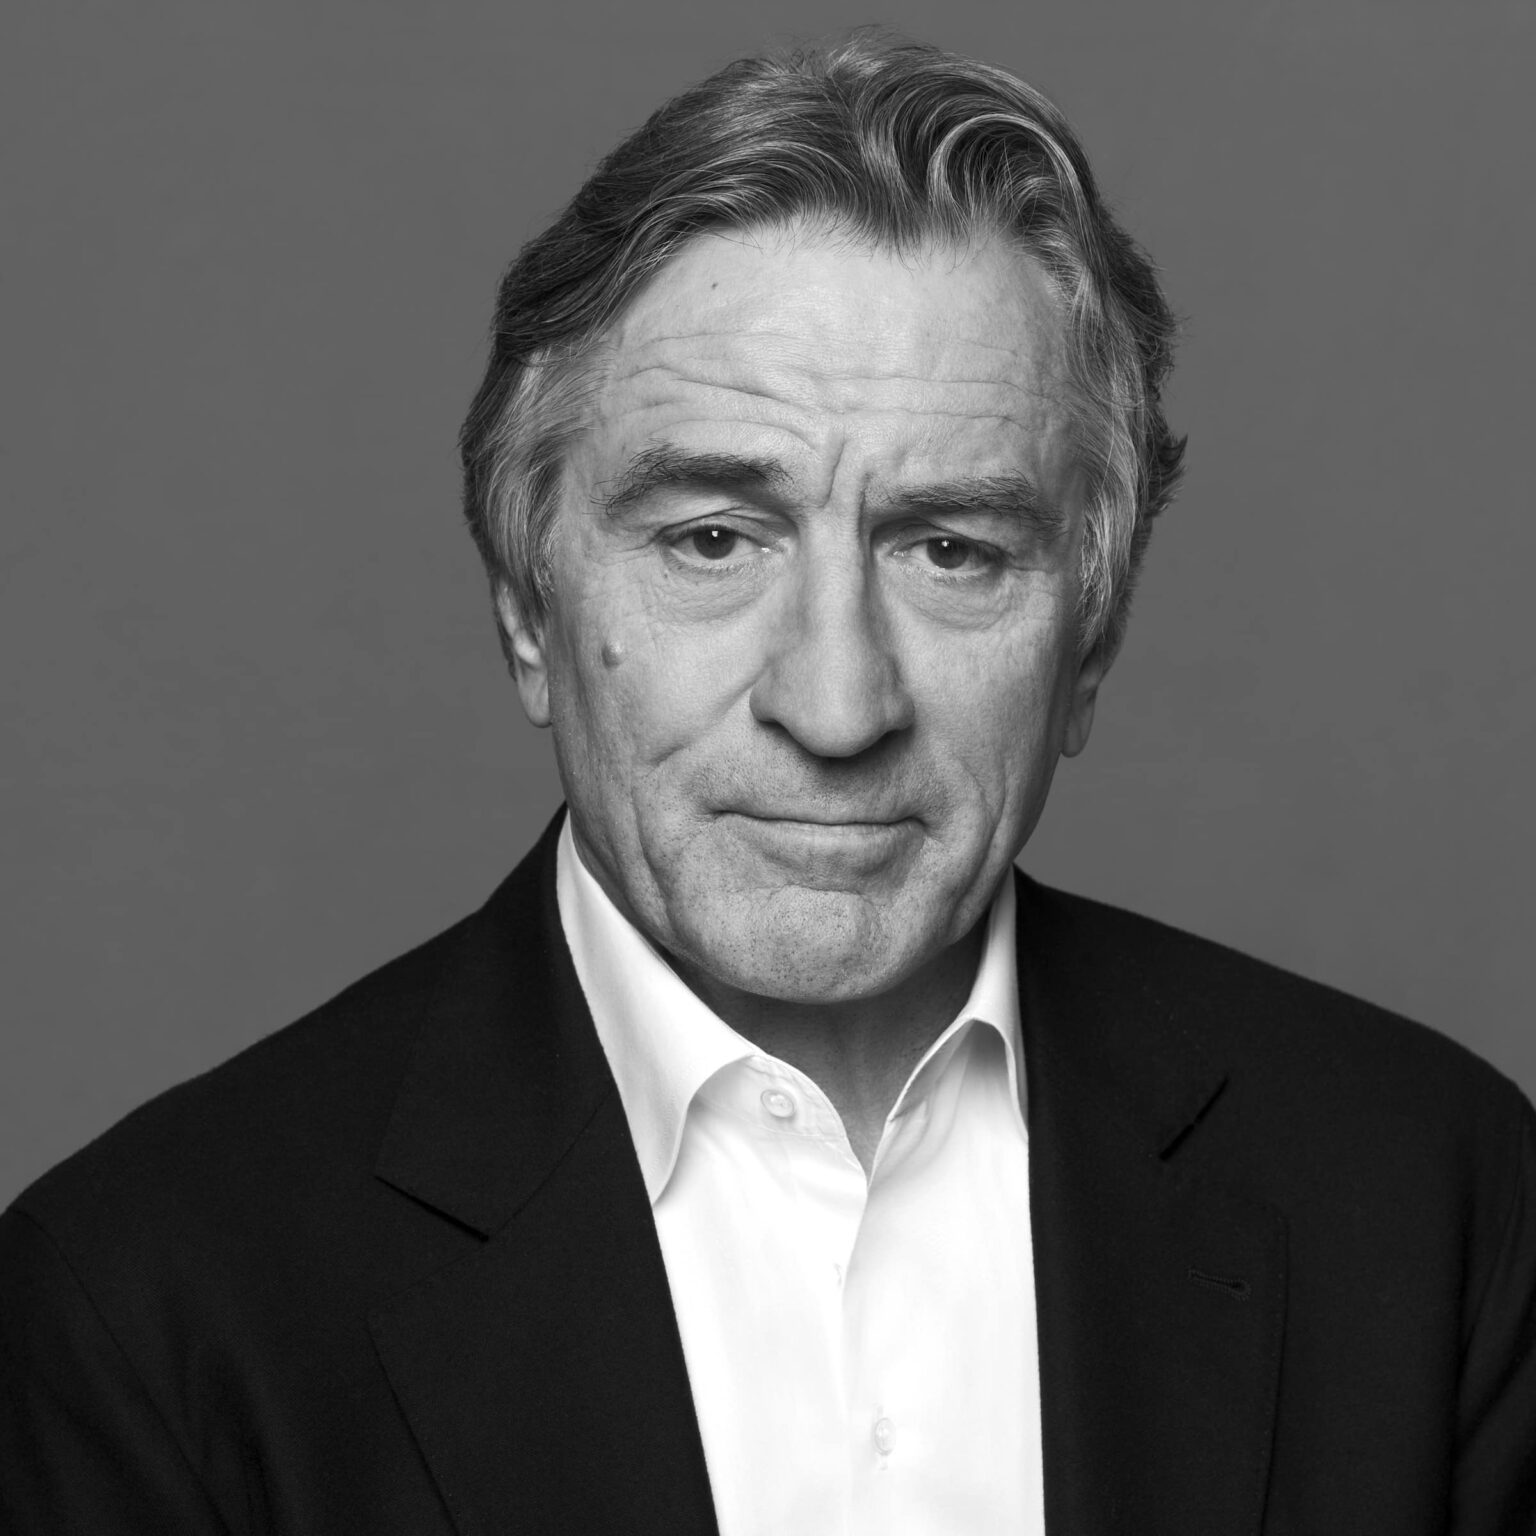 Happy birthday Robert De Niro! As the legendary actor celebrates his 78th birthday, let's take a look at how he has made (and spends) his massive net worth.